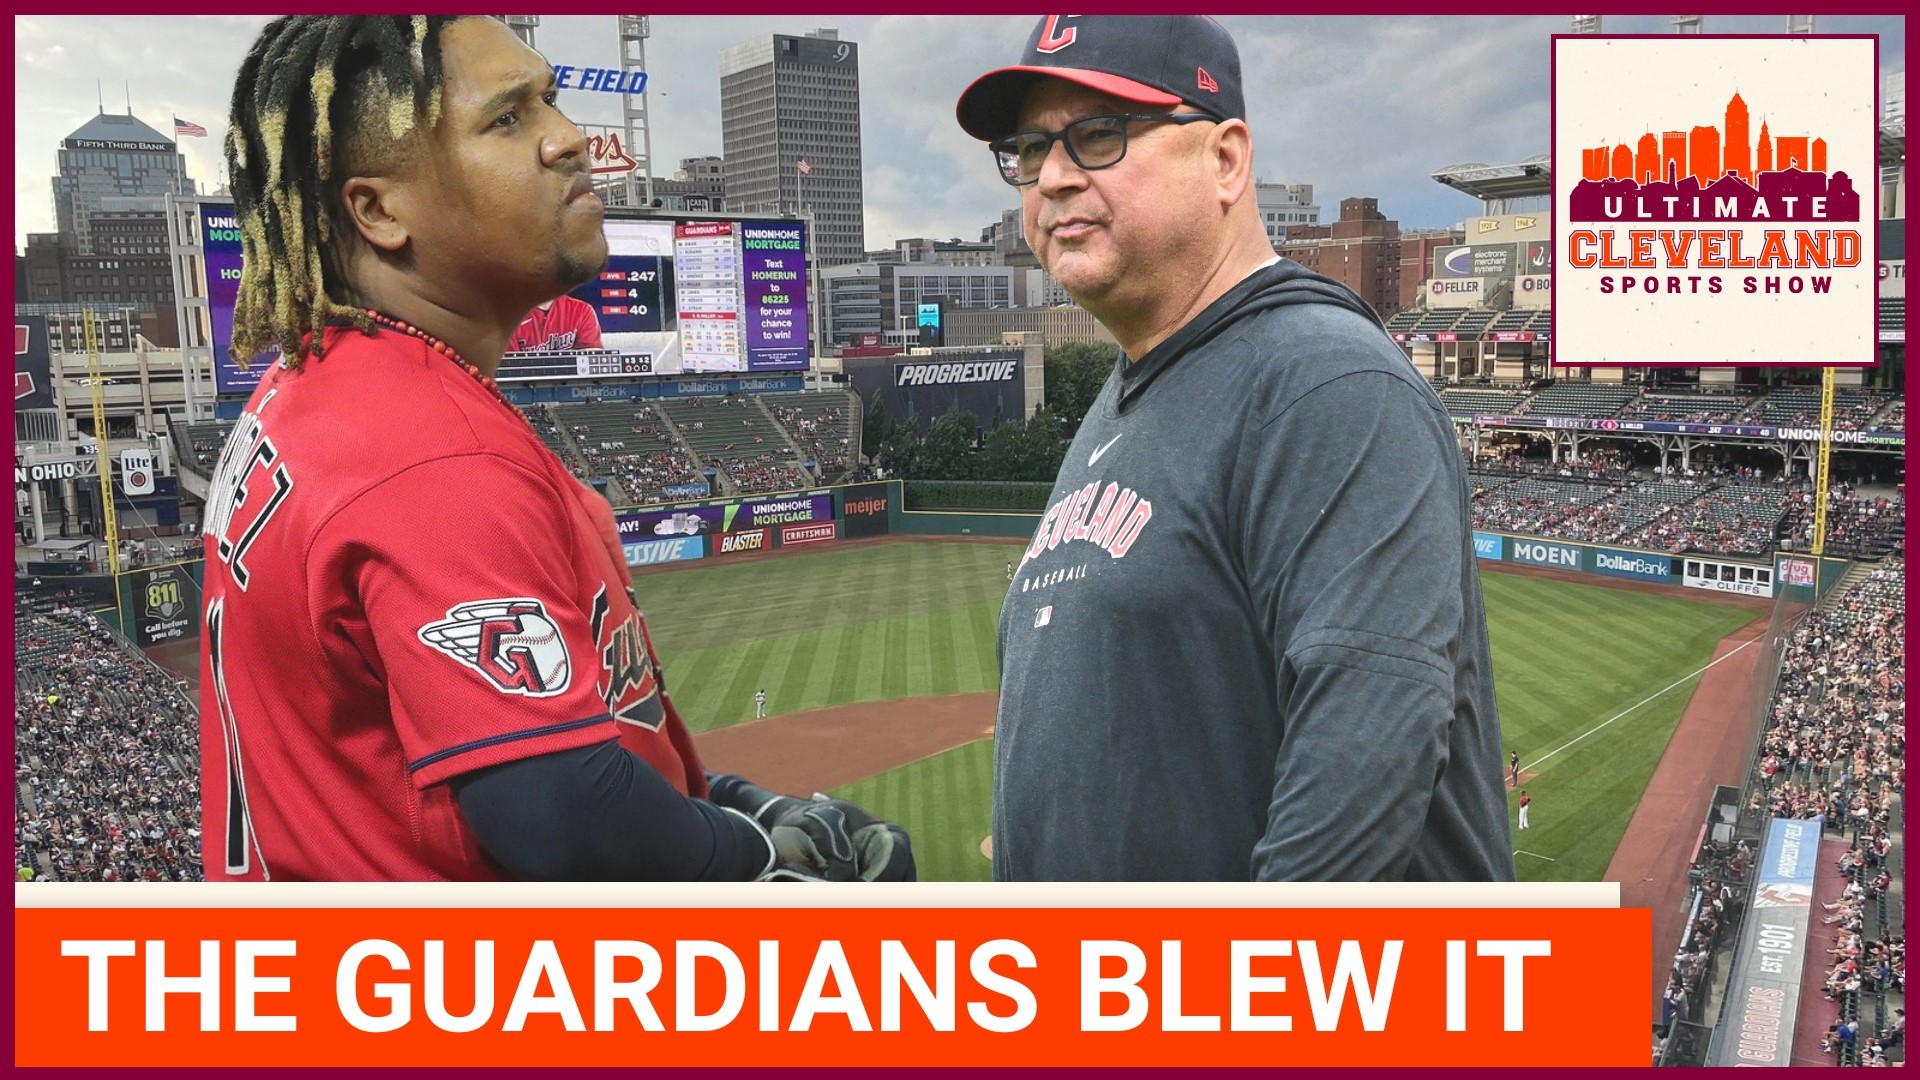 The Cleveland Guardians blew it in their last hope of making the playoffs in an embarrassing outing against the Twins losing 20-6